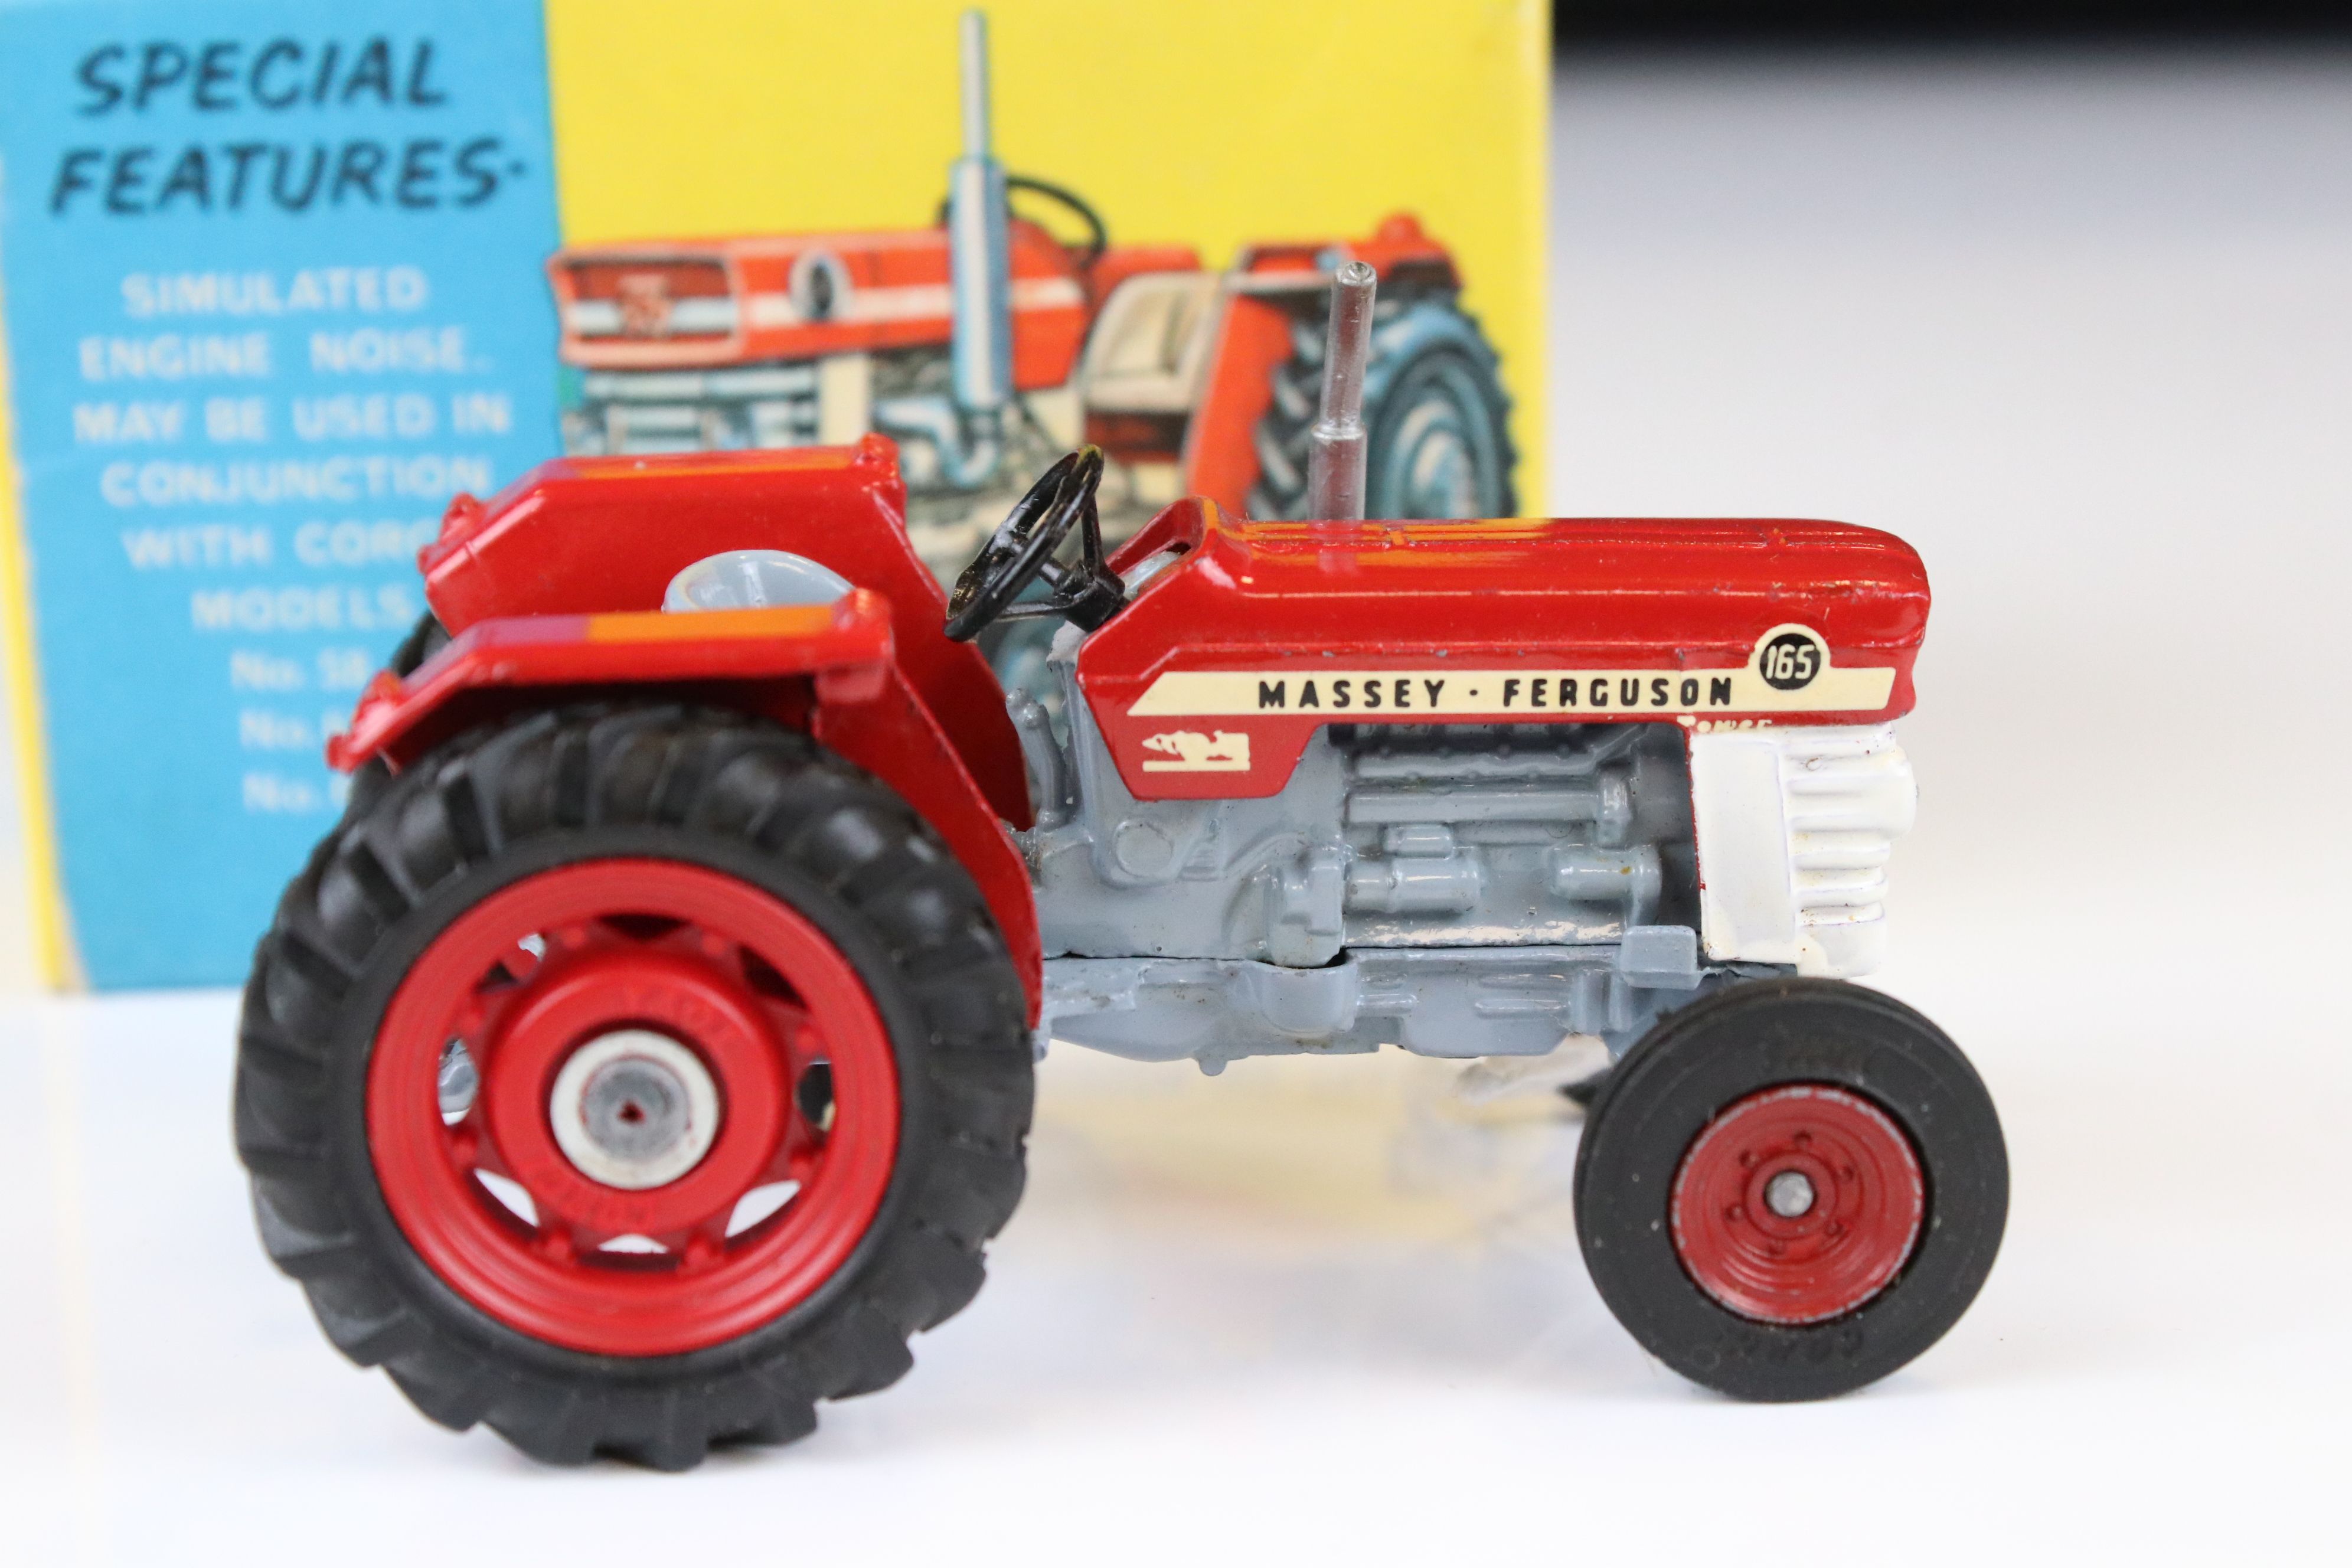 Boxed Corgi 66 Massey Ferguson 165 Tractor in red, decals and diecast vg/ex, box vg, plus a boxed - Image 8 of 13